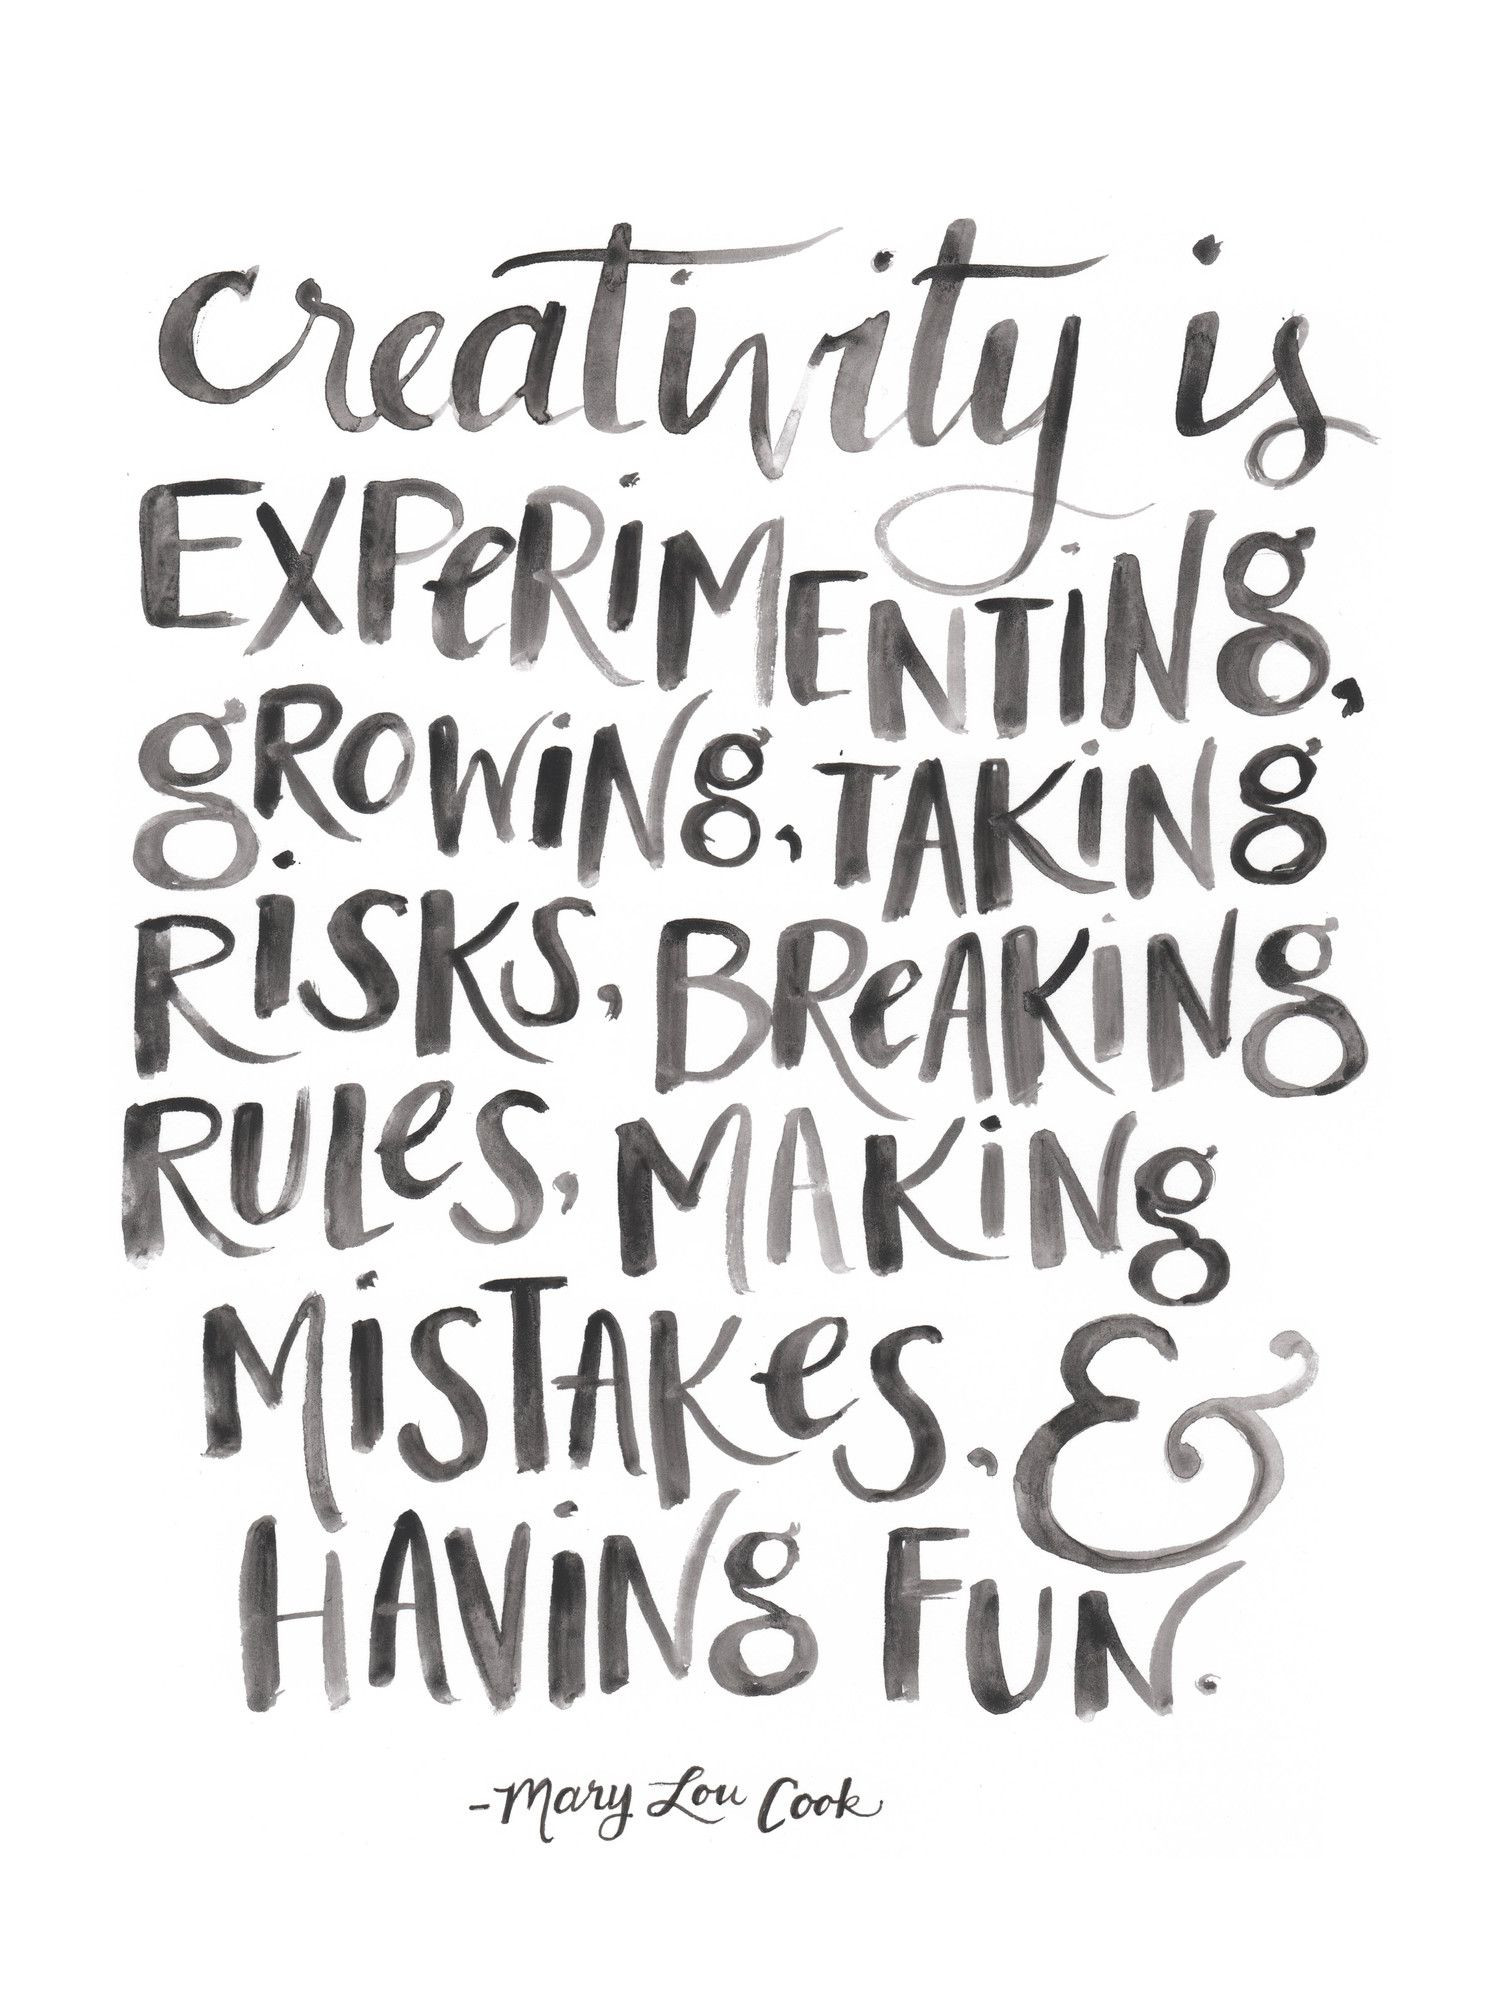 Creative Inspirational Quotes
 10 Practices to Help Over e a Creative Block